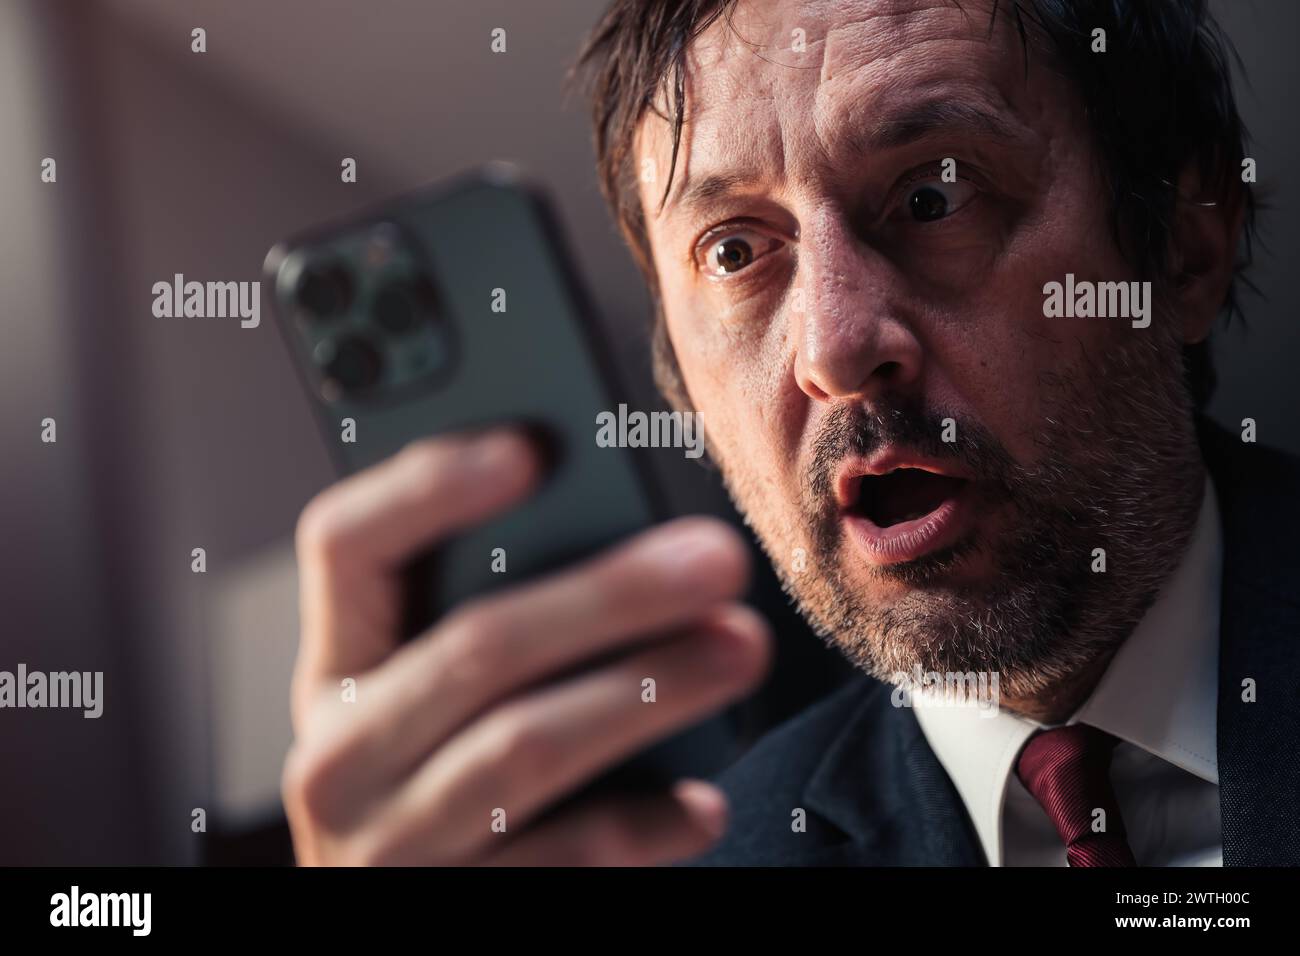 Shocked businessman reading text message on smartphone with surprised facial expression, selective focus Stock Photo